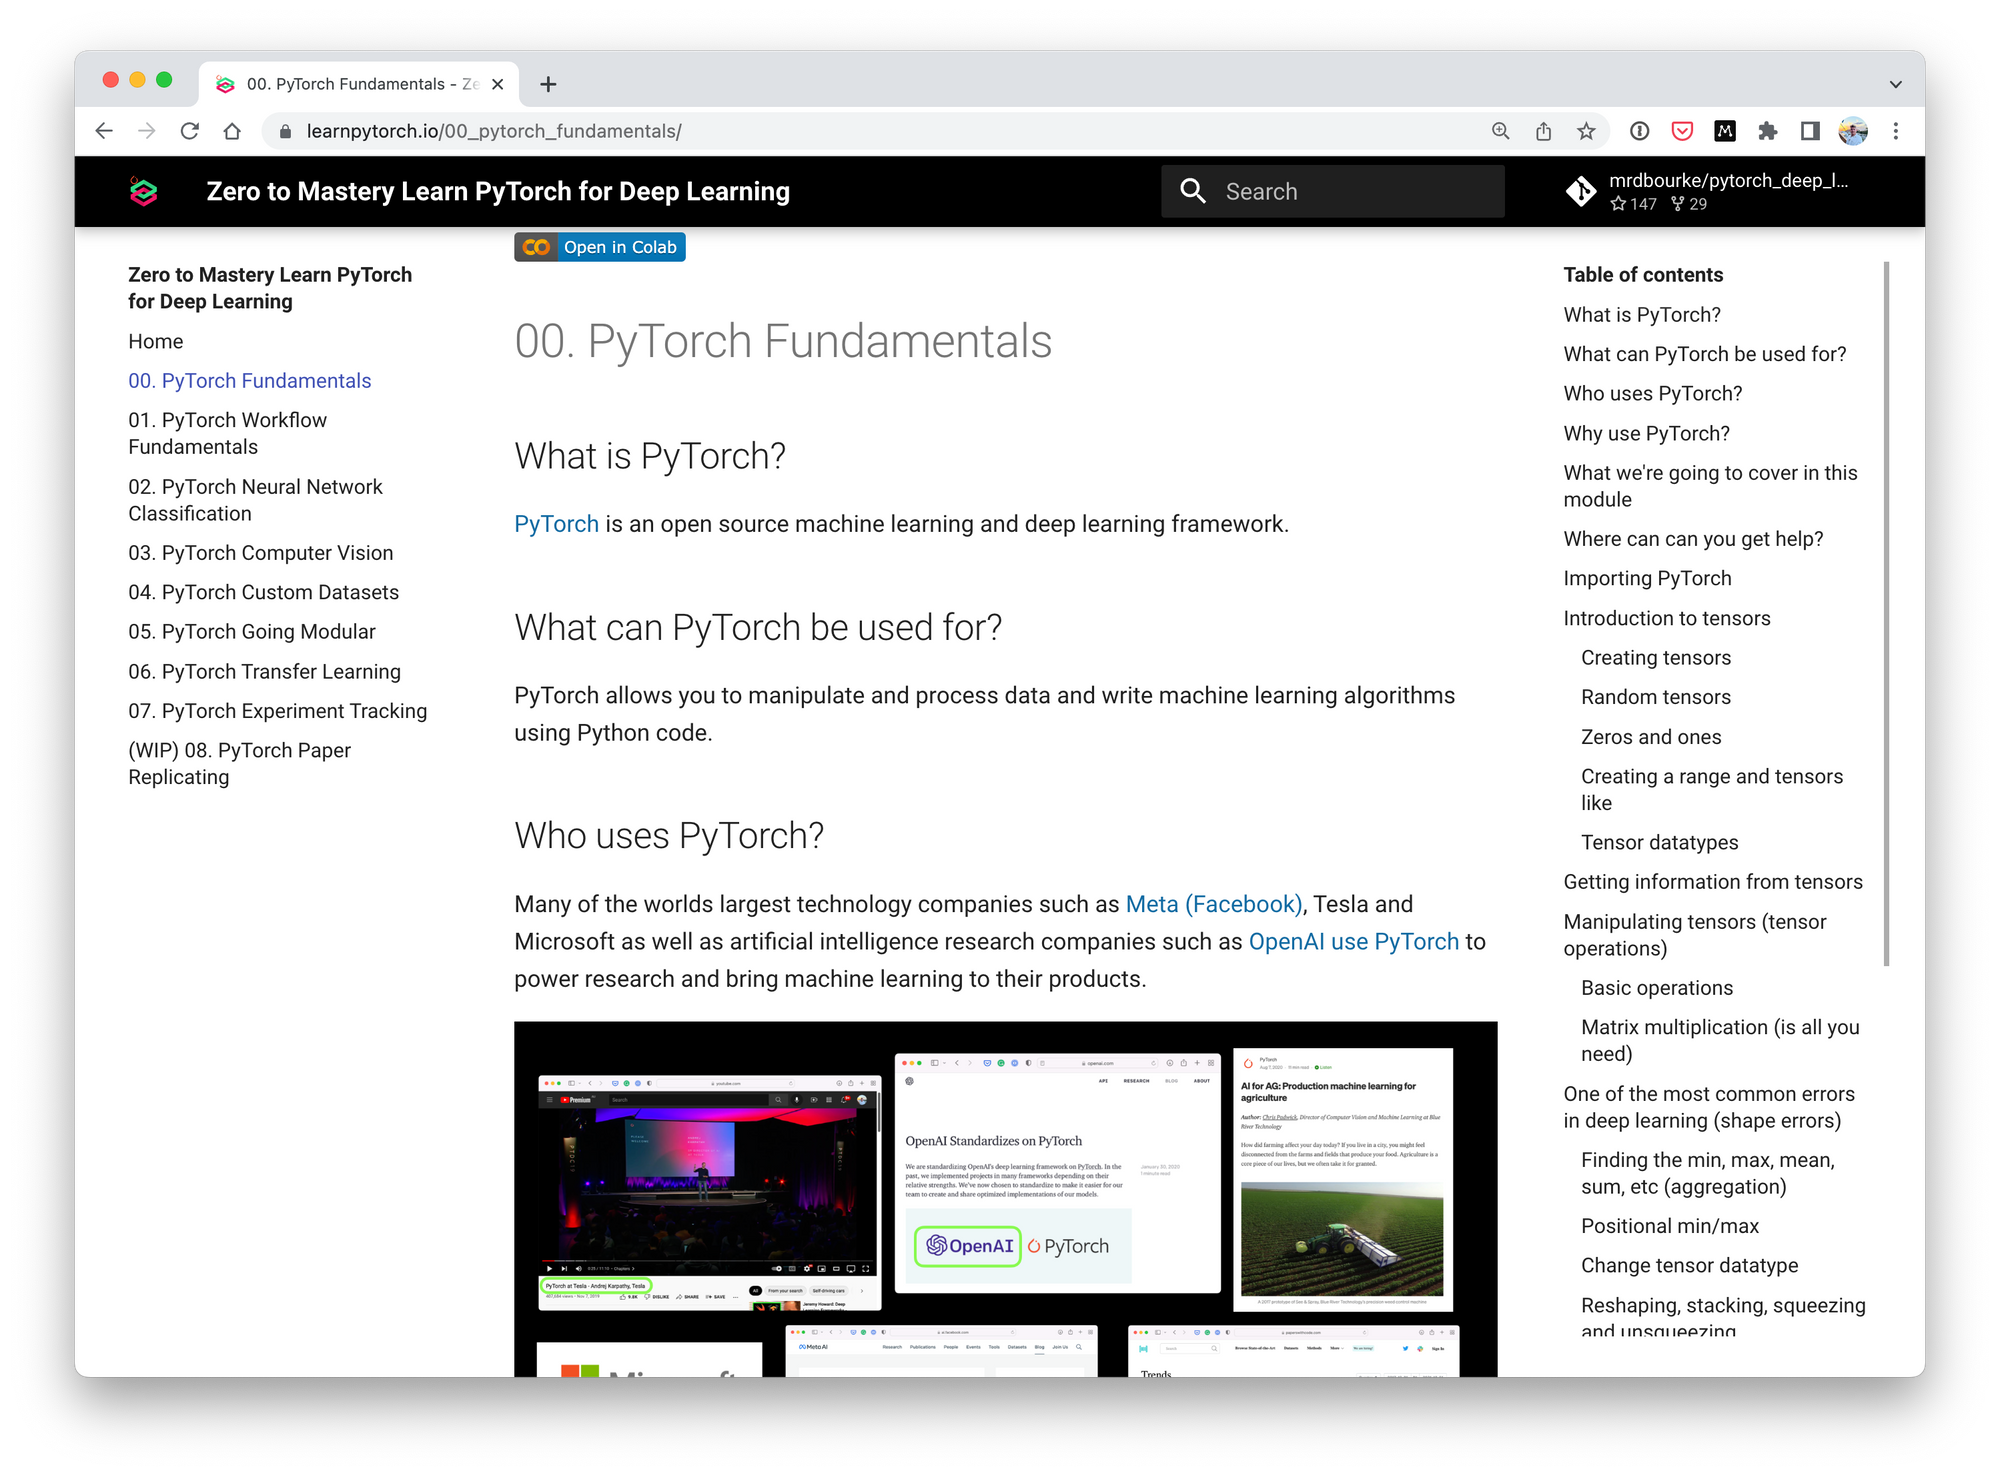 learnpytorch.io home page for PyTorch fundamentals section of learn PyTorch for deep learning zero to mastery course